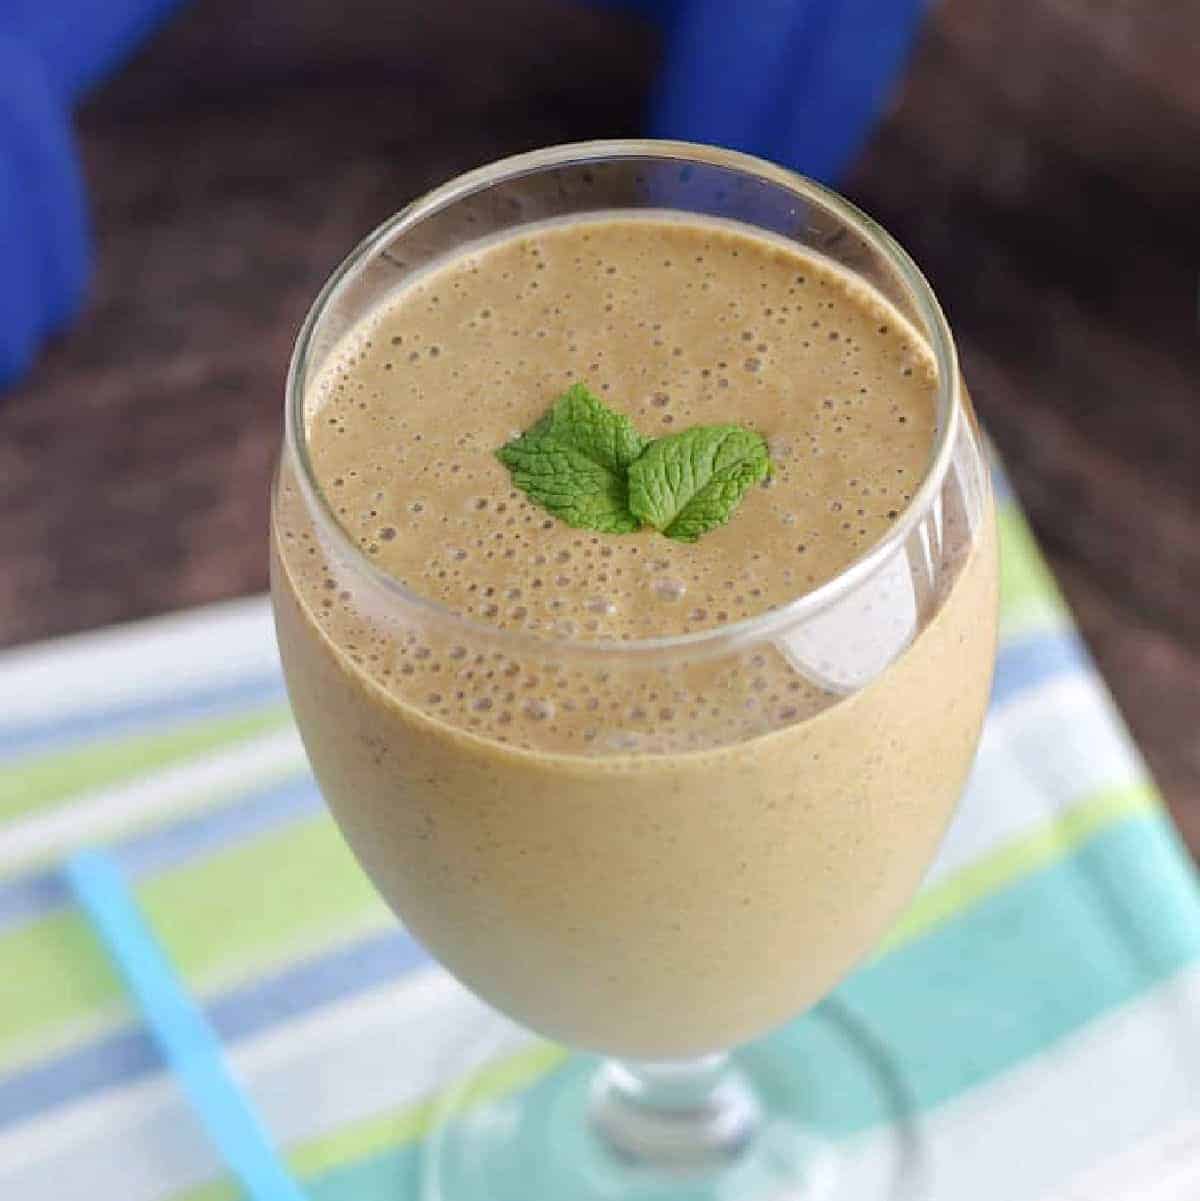 Chocolate peanut butter smoothie in a goblet glass topped with fresh mint.